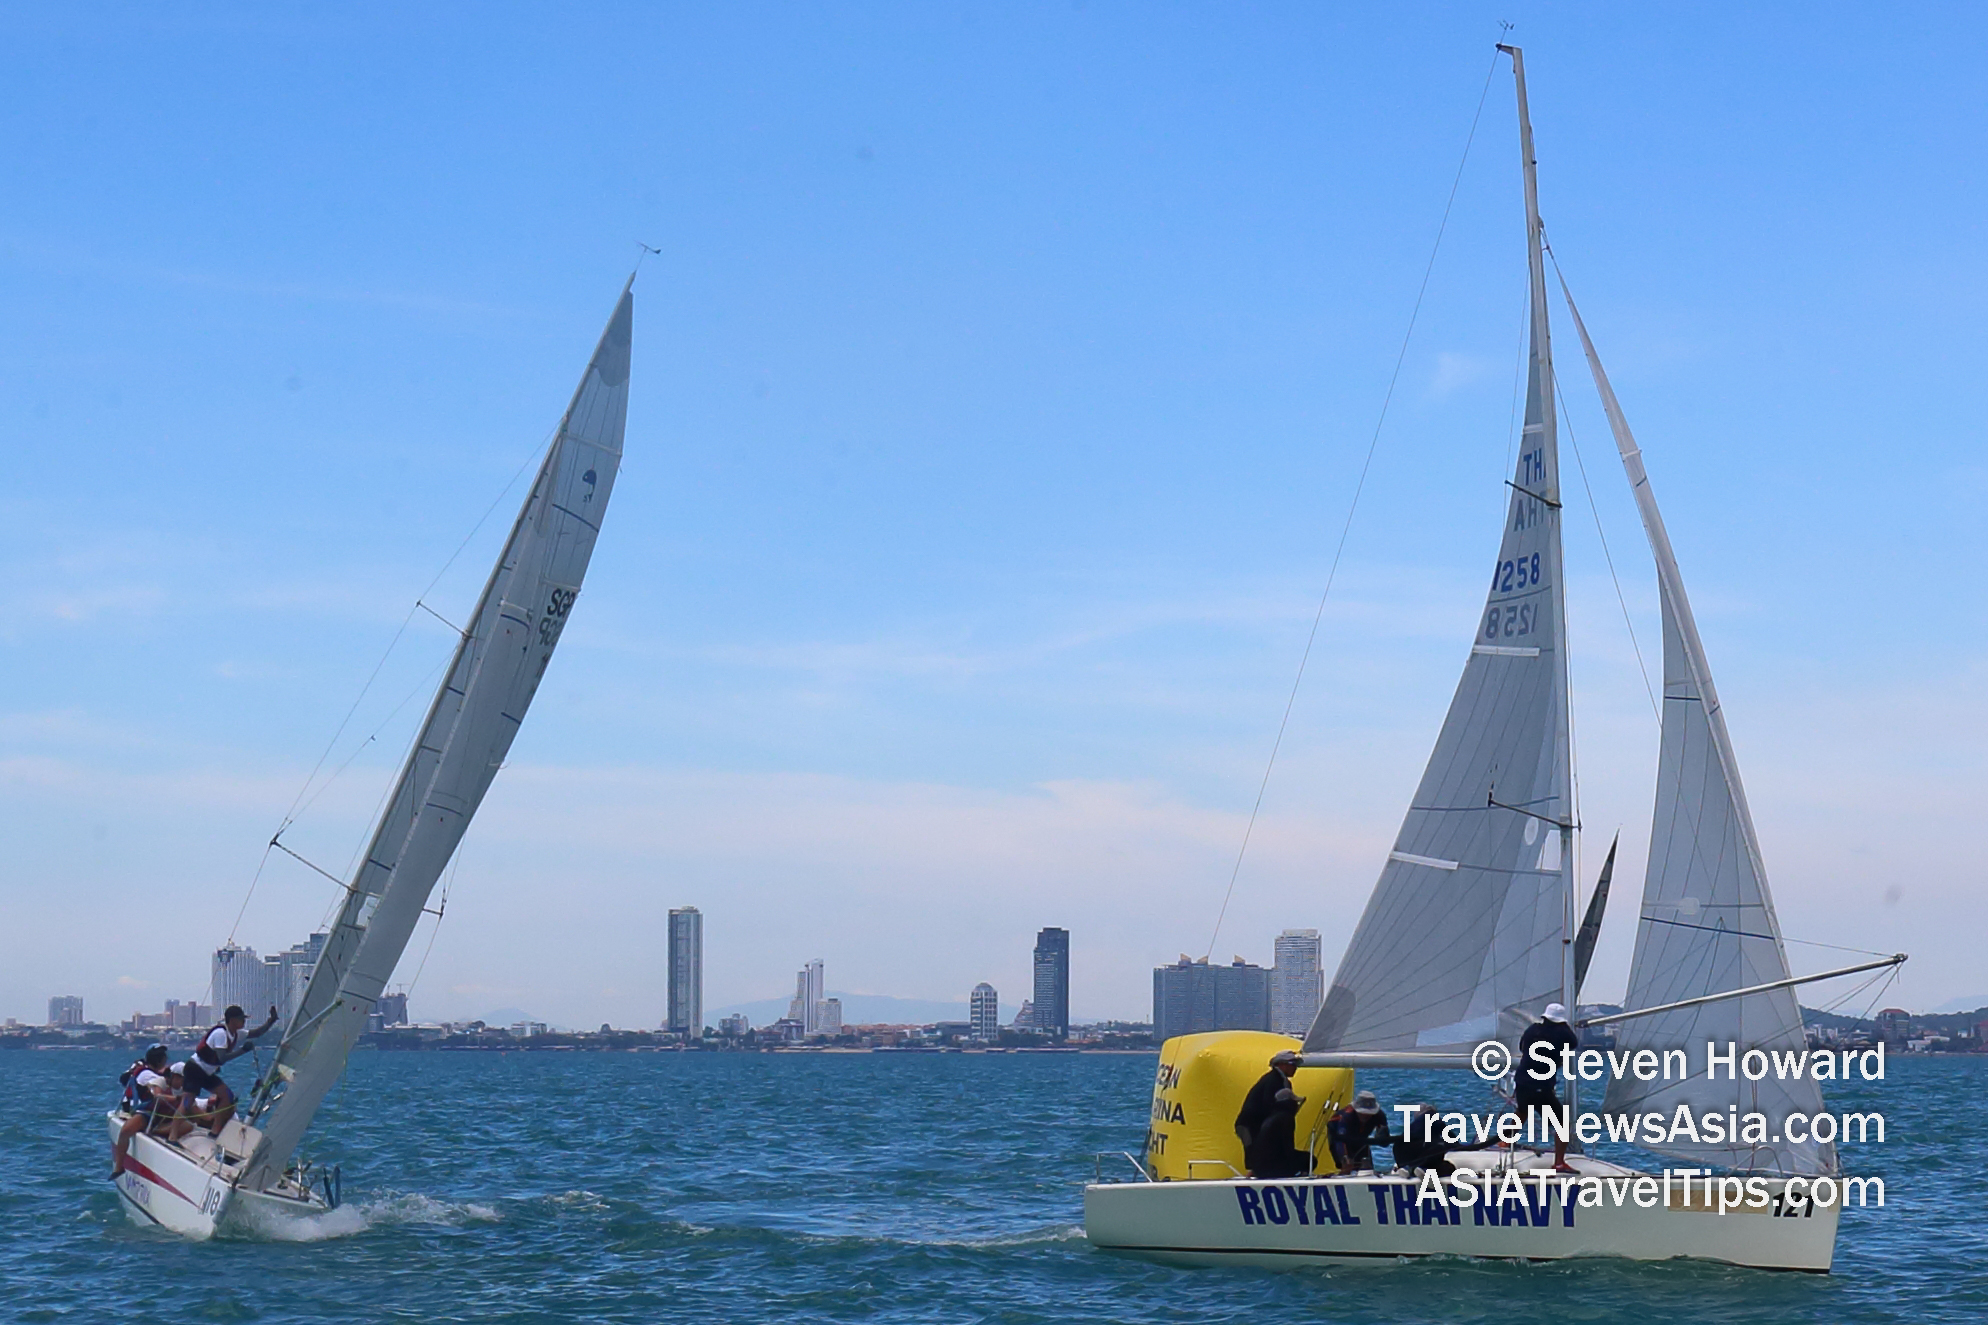 Pictures from Top of the Guf Regatta 2019 in Pattaya, Thailand